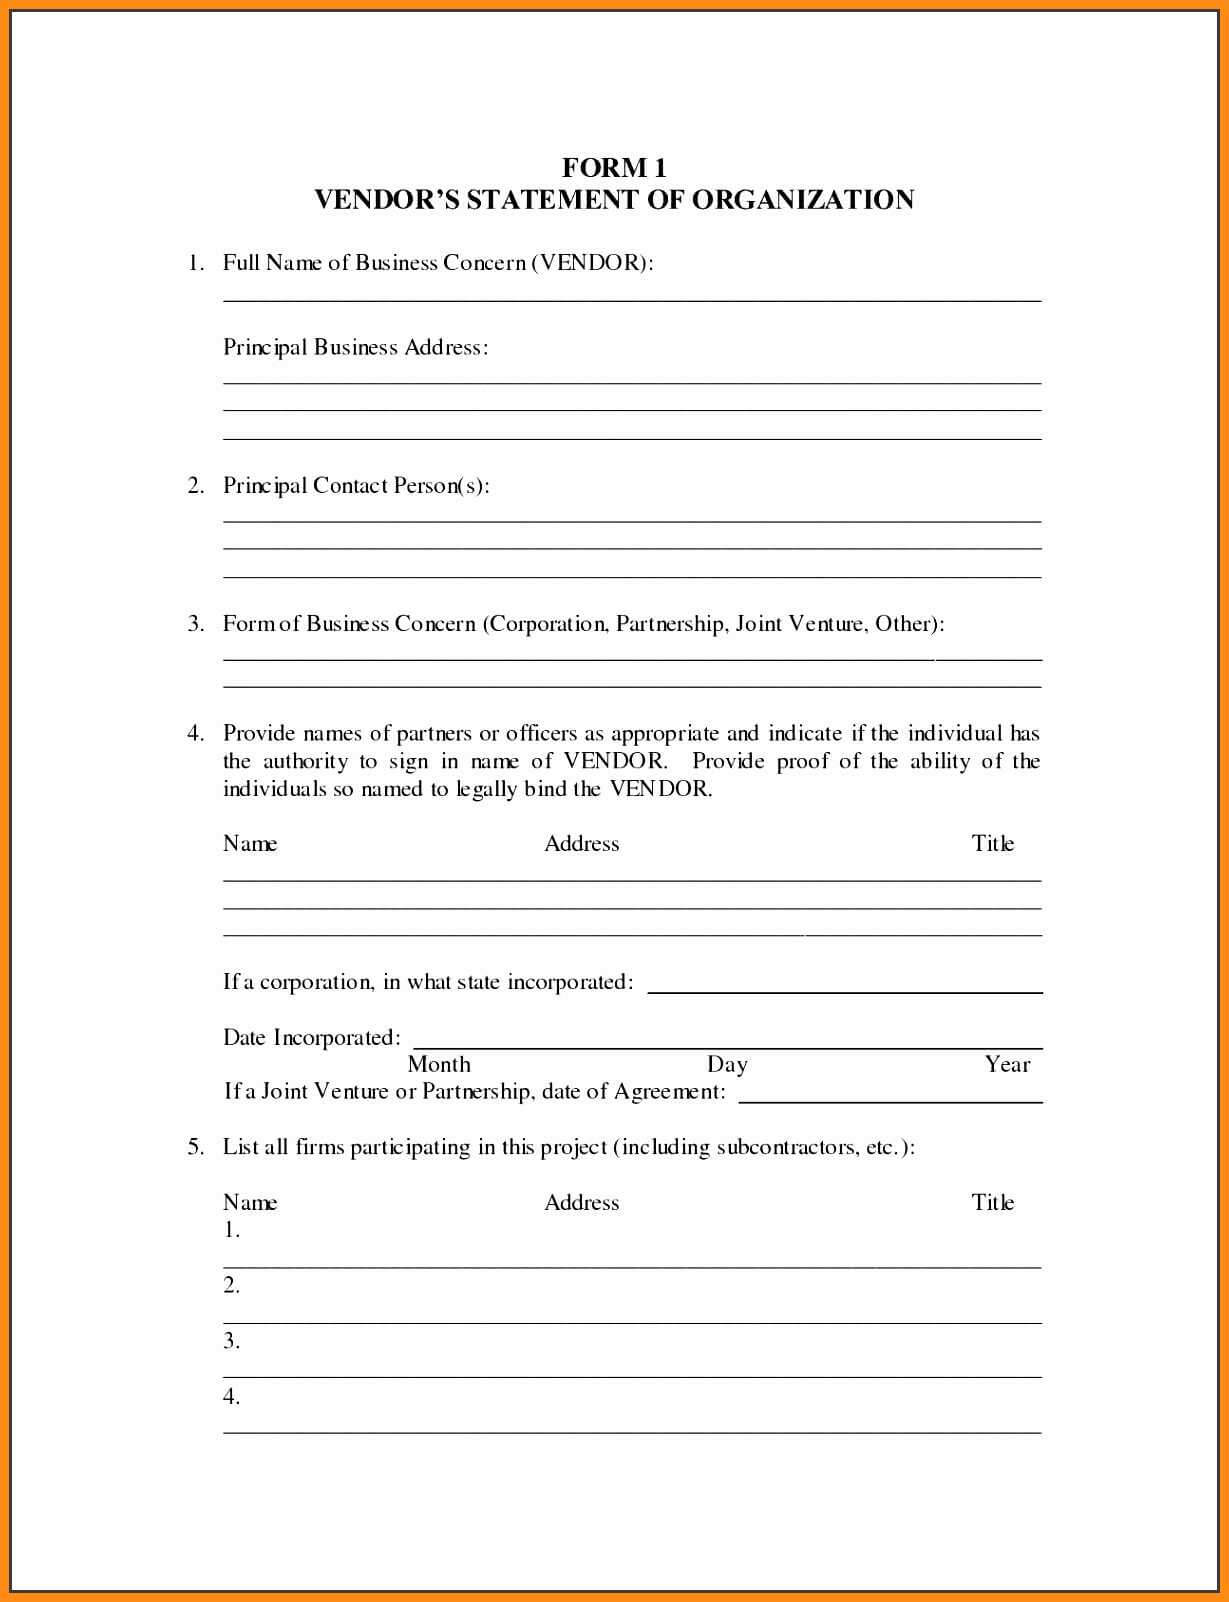 8+ Customer Information Form Template Microsoft Word | Odr2017 Pertaining To Business Information Form Template